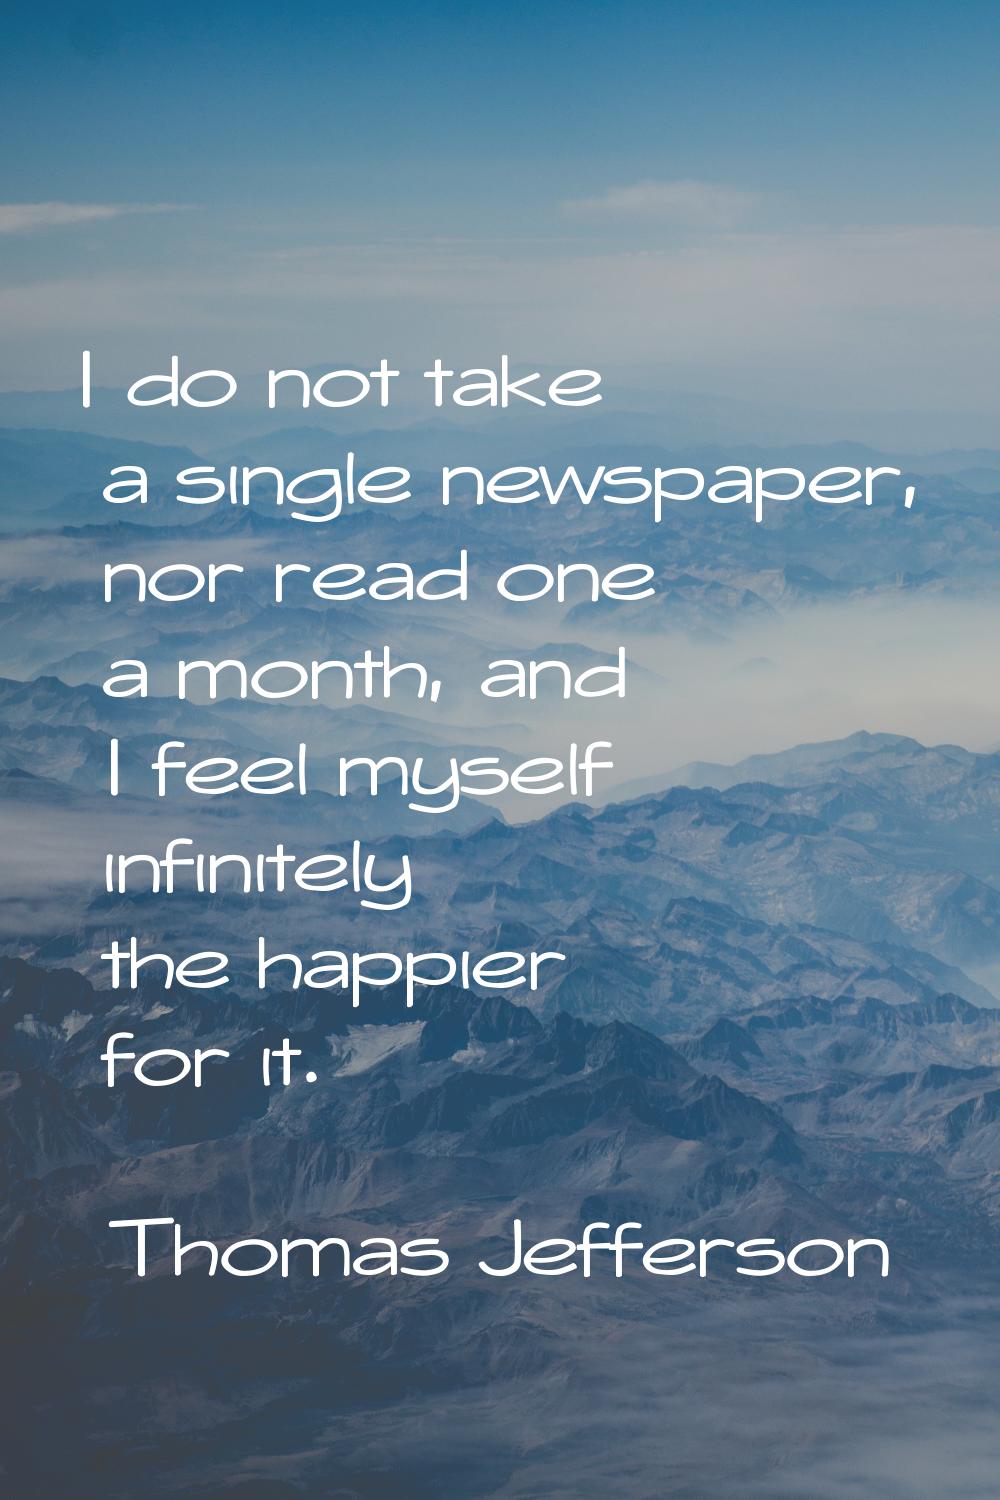 I do not take a single newspaper, nor read one a month, and I feel myself infinitely the happier fo